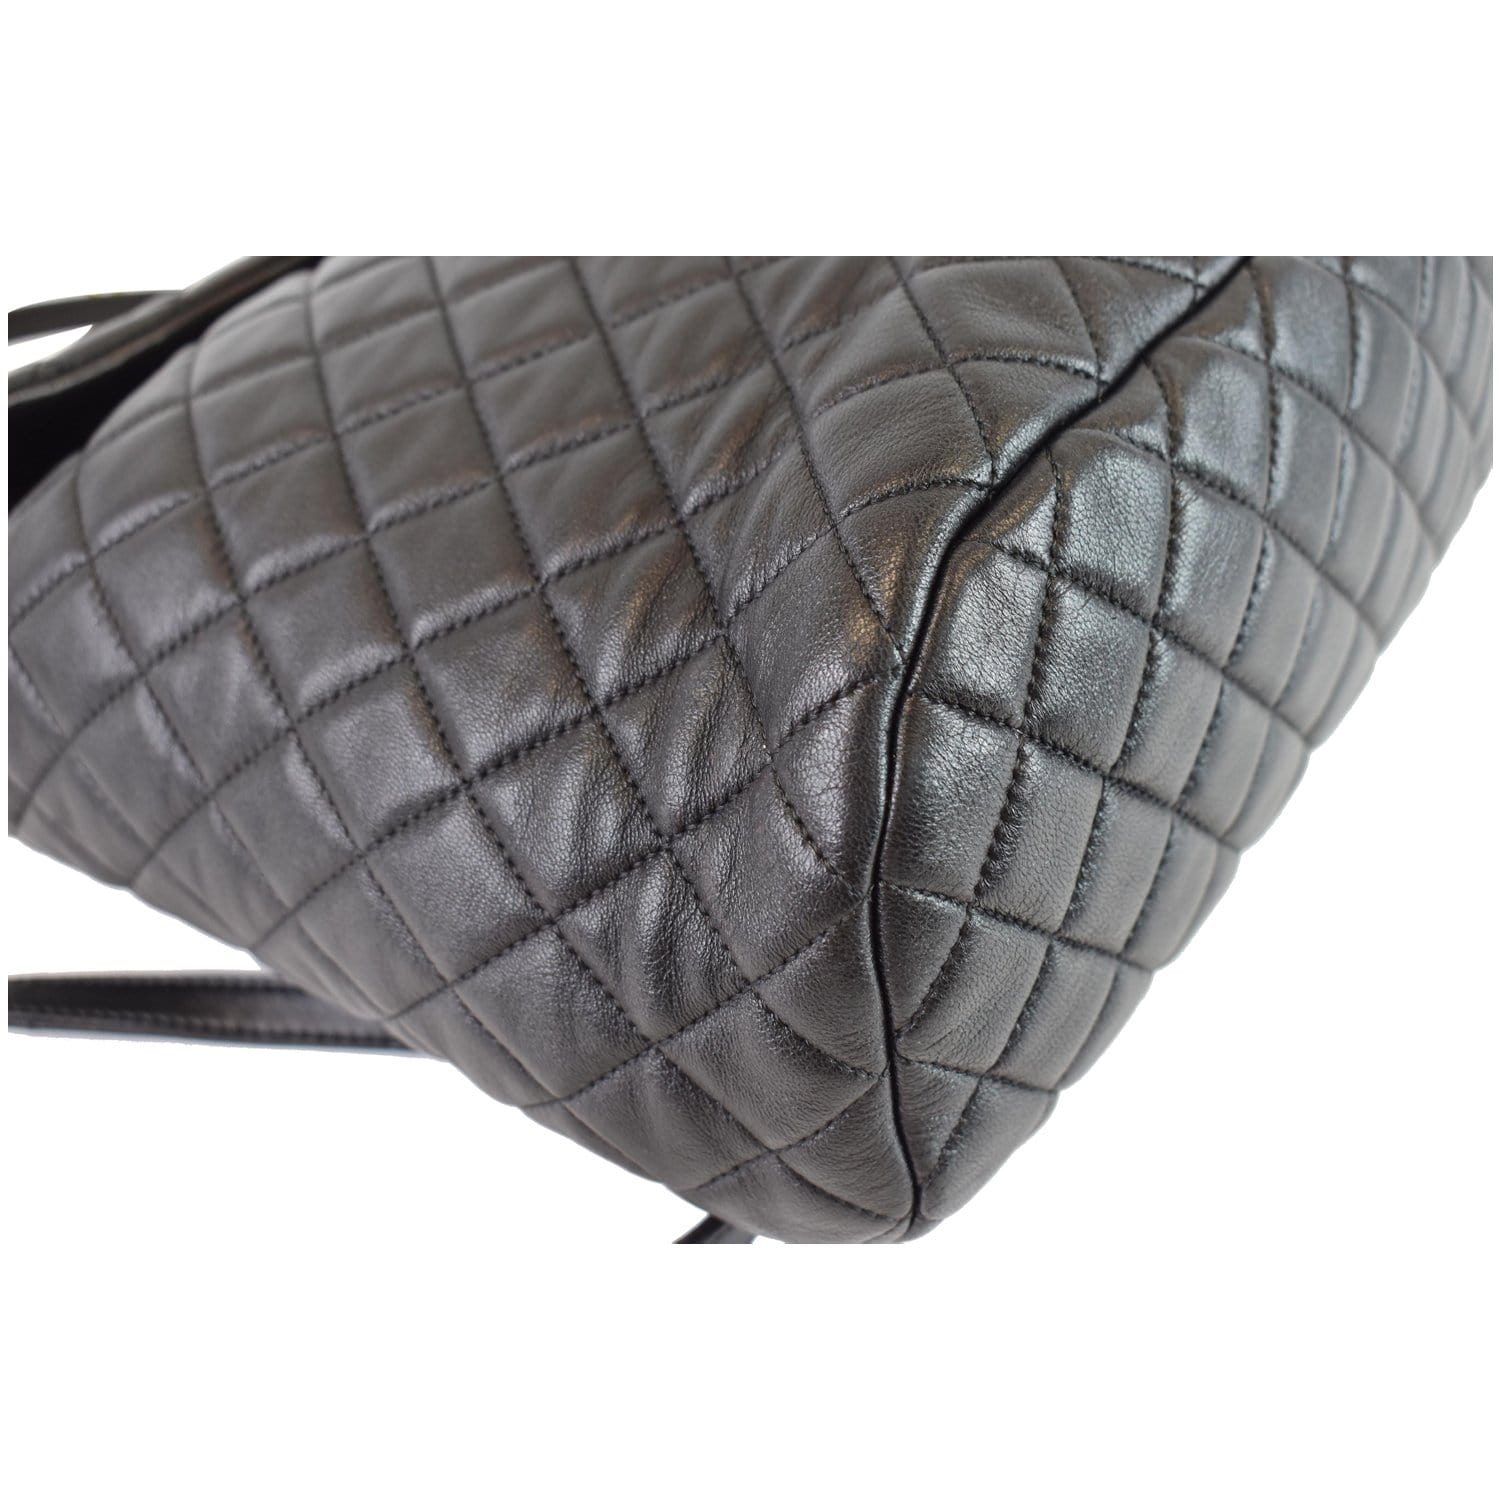 CHANEL Lambskin Quilted Small Urban Spirit Backpack Black 206817